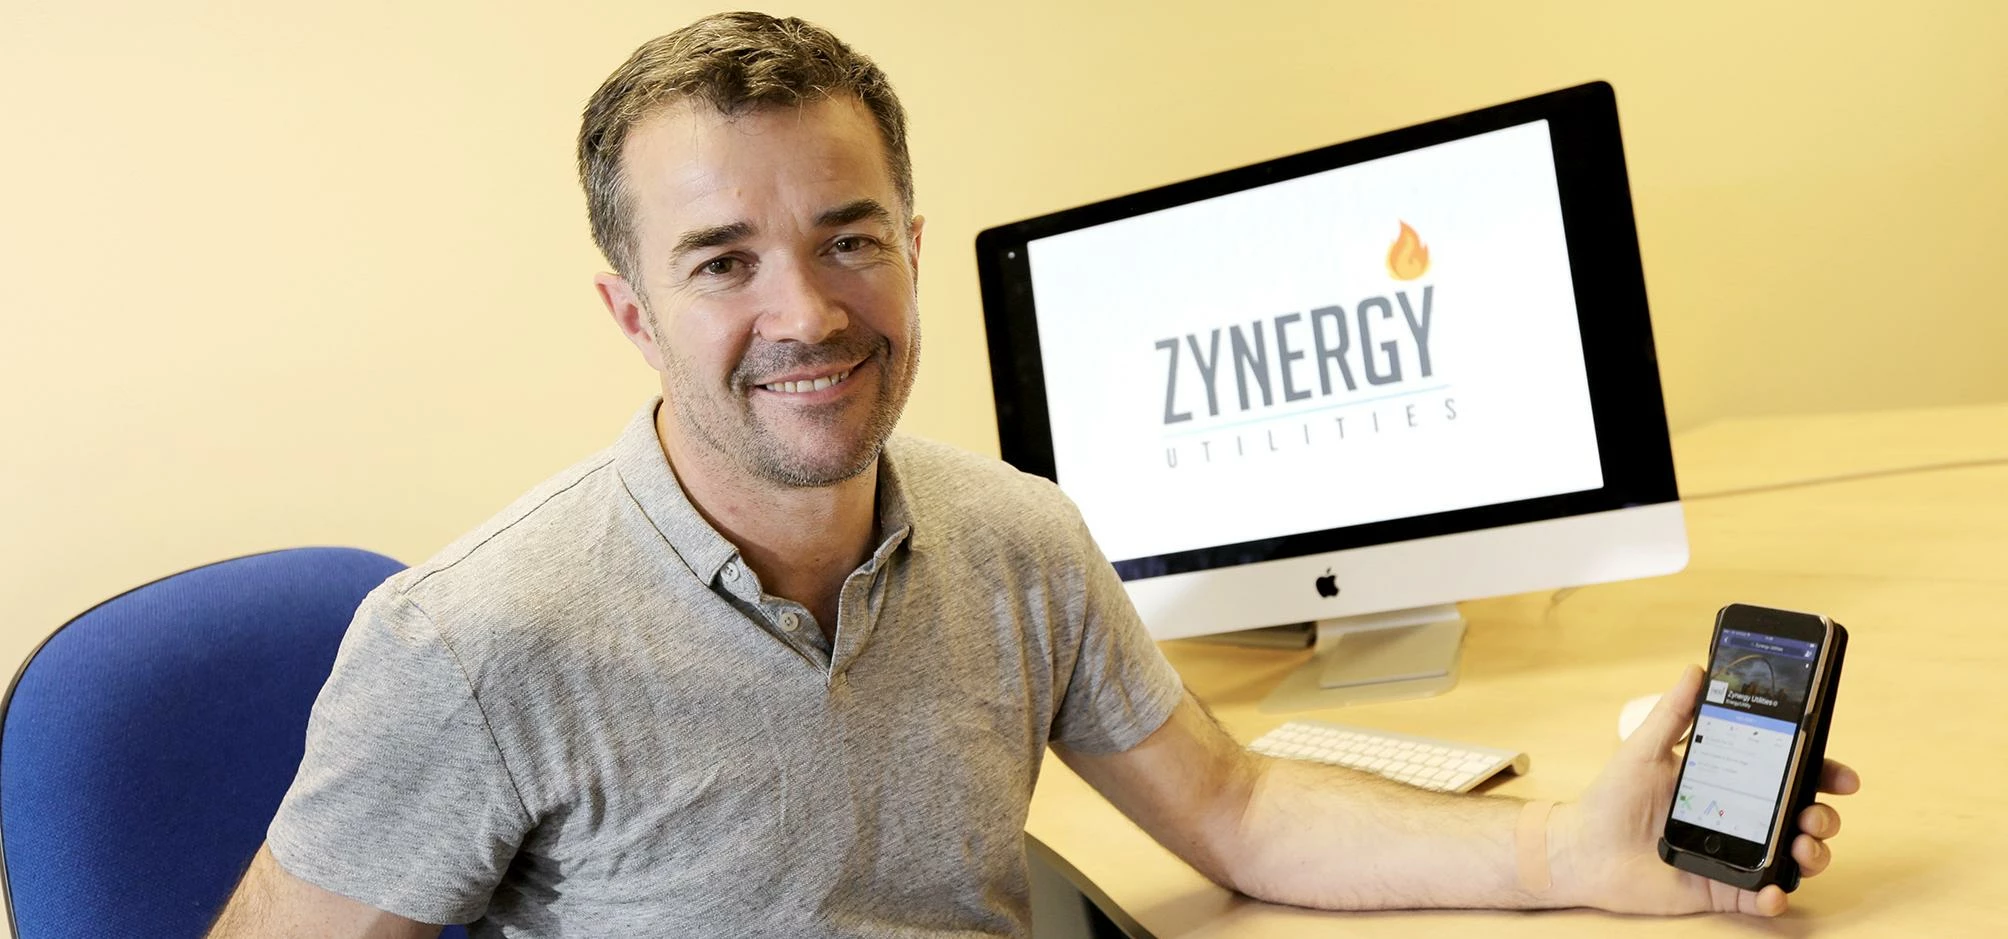 Mike Dodds, Director of Zynergy Utilities has located his business at The Hub in Washington and has 